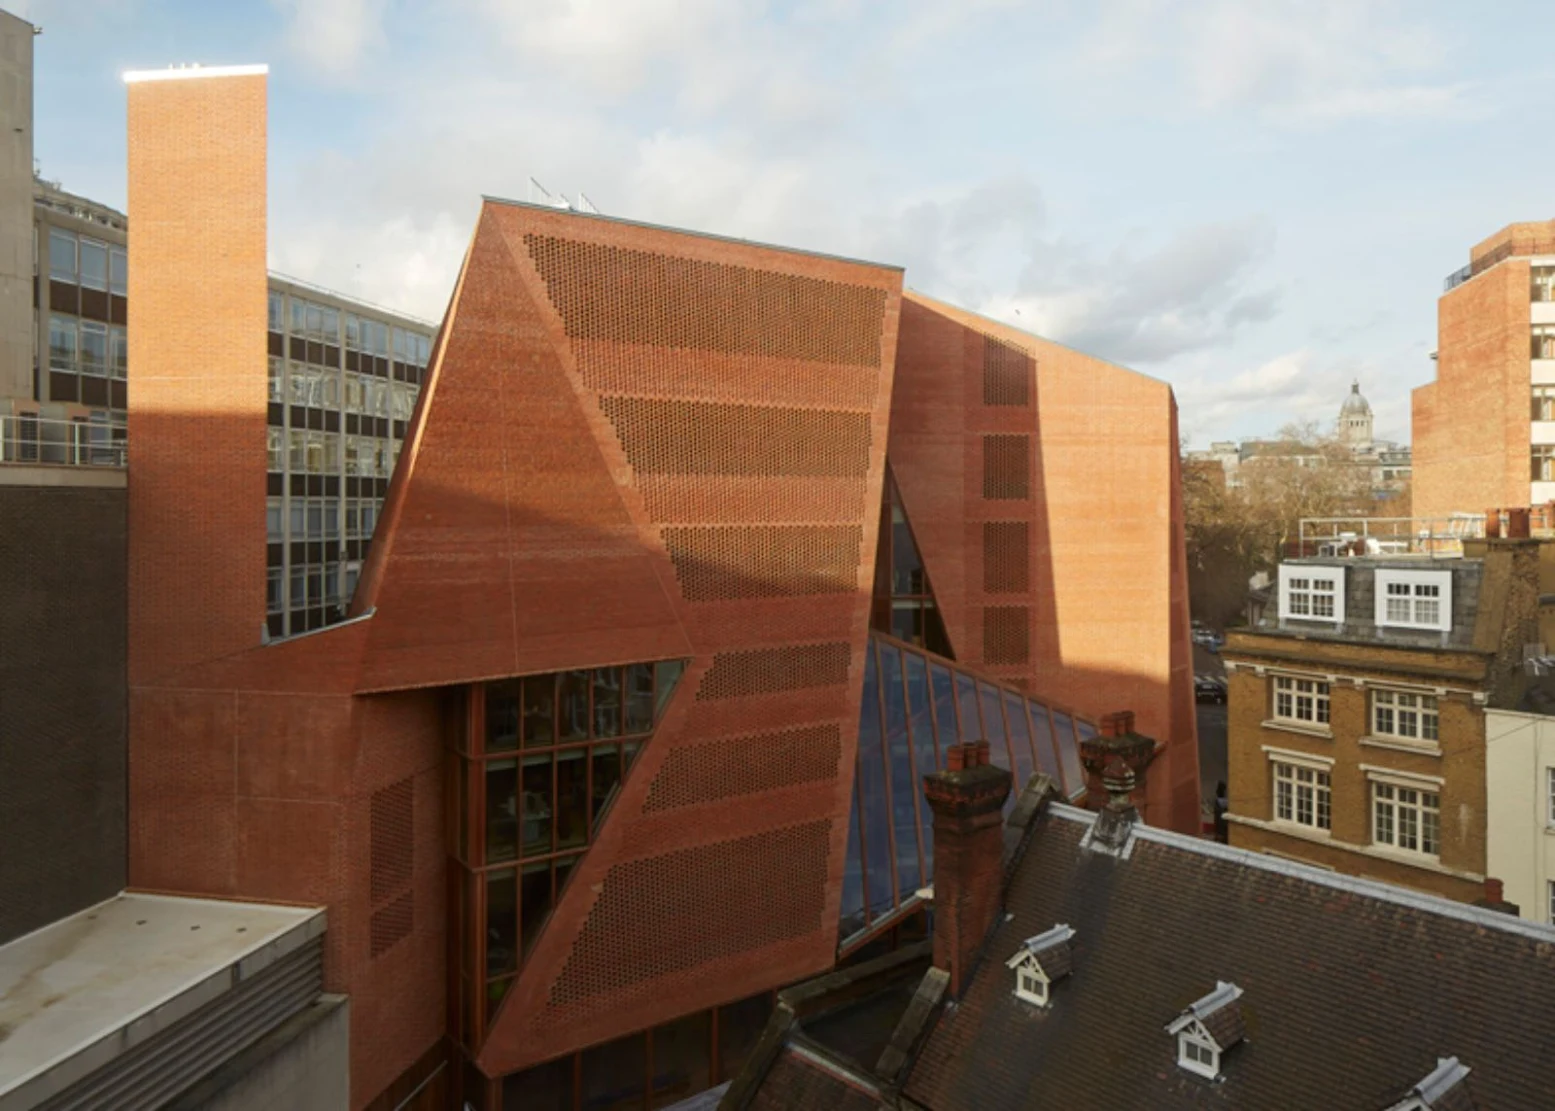 LSE Saw Swee Hock Students Centre by O